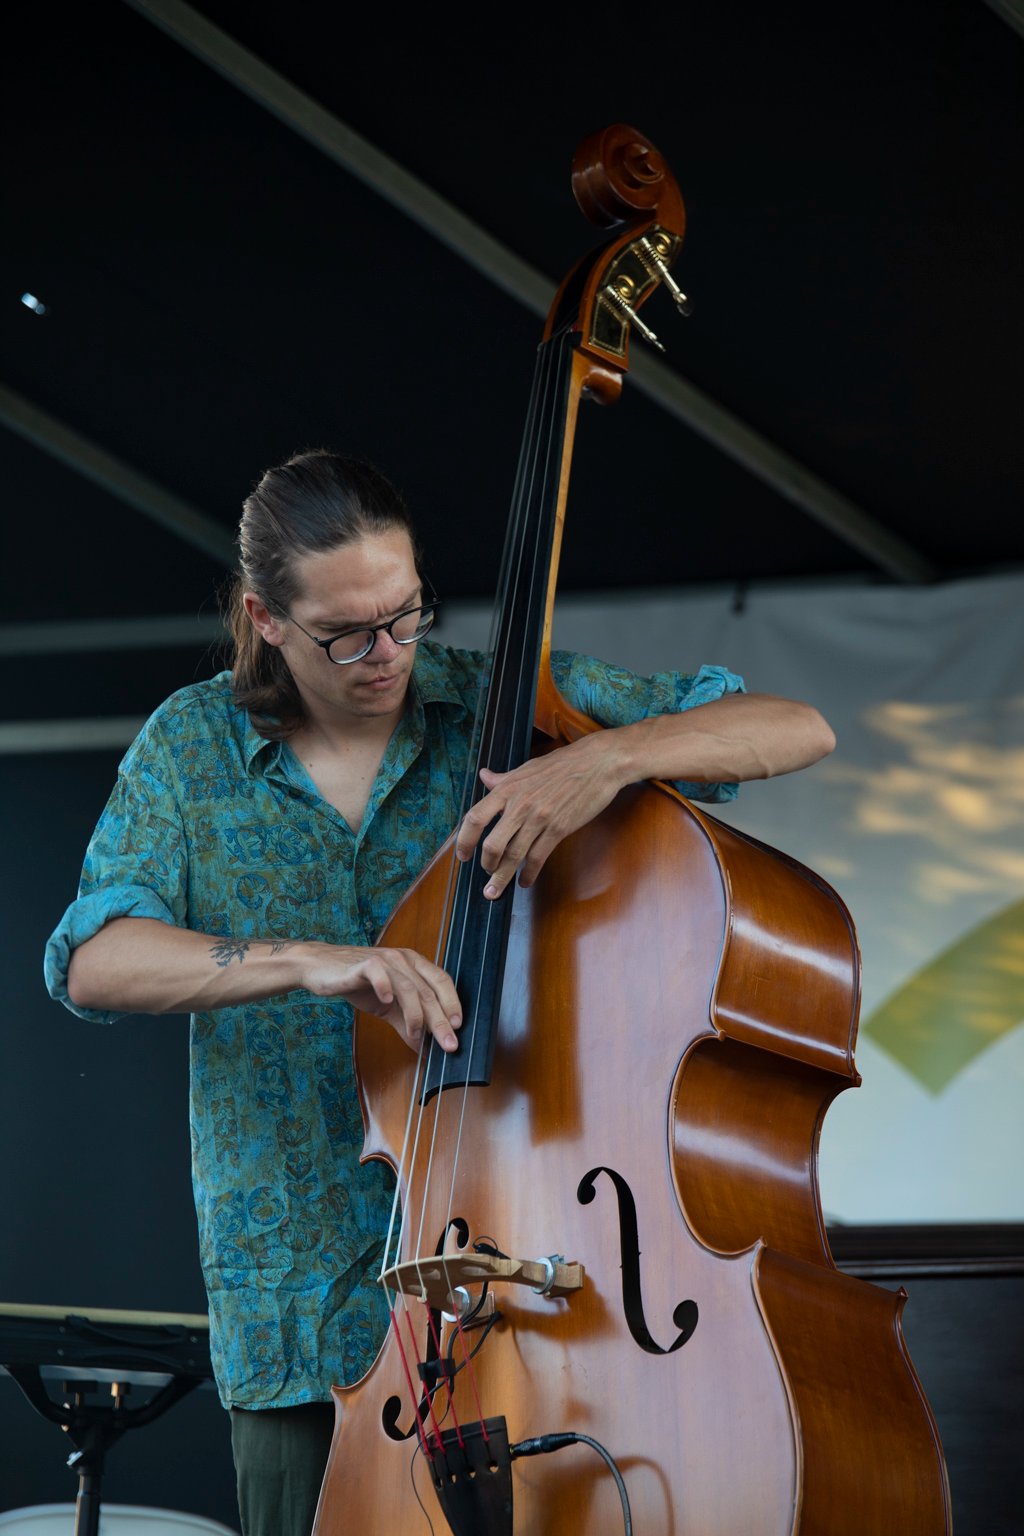 a picture of David playing at the Nigran Jazz Festival, wearing a light blue patterned shirt